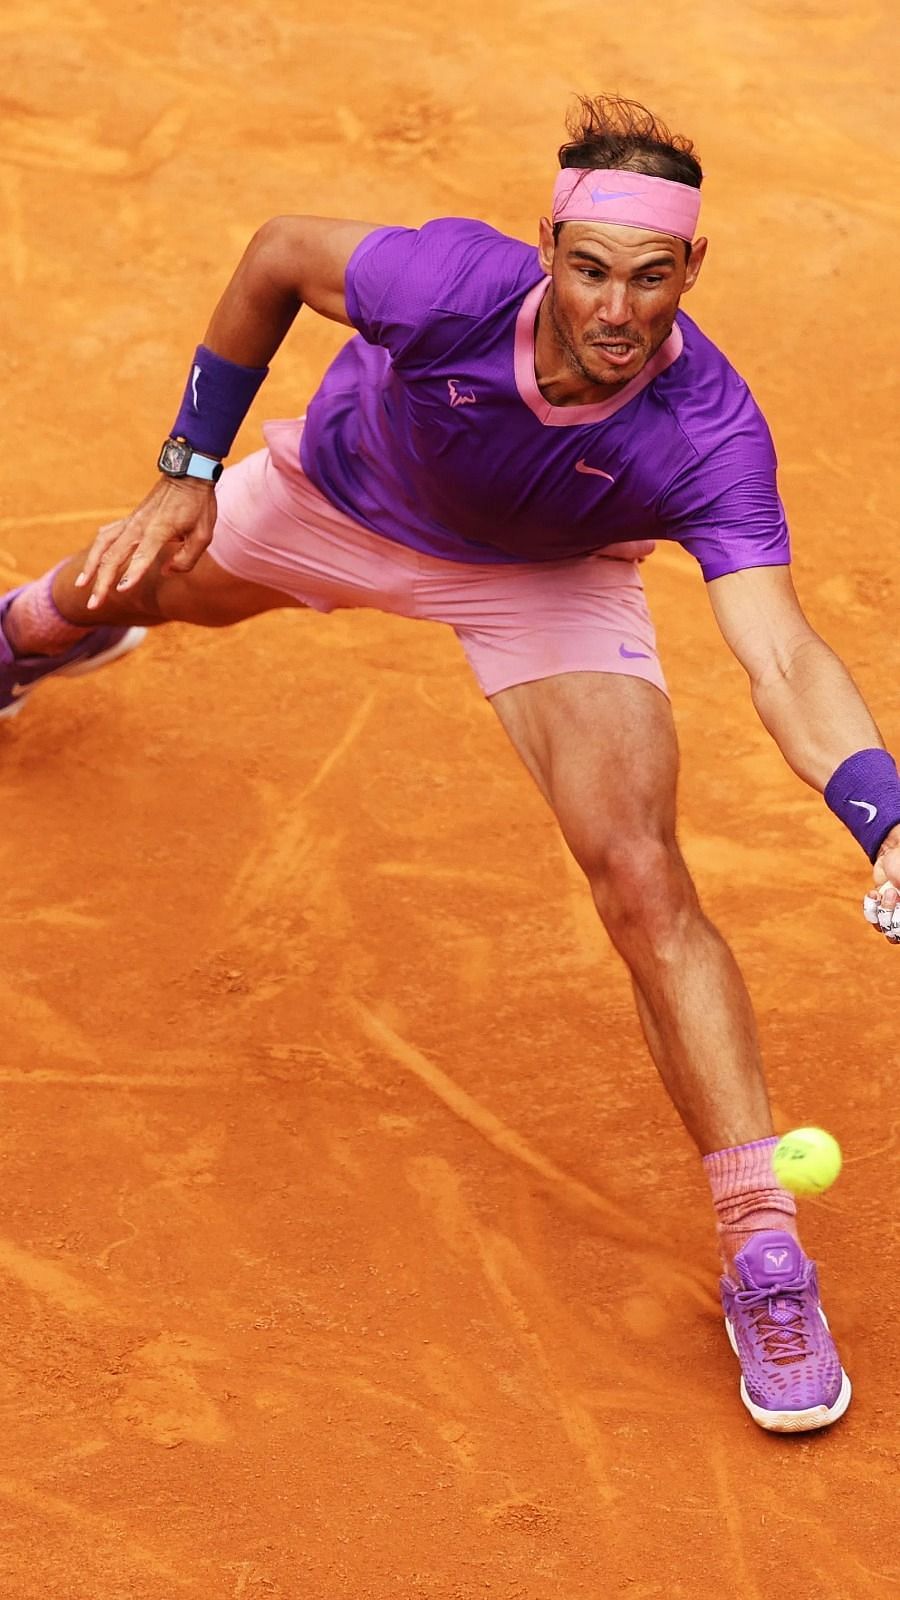 Italian Open 2021 Rafael Nadal vs Reilly Opelka preview, head-to-head and prediction